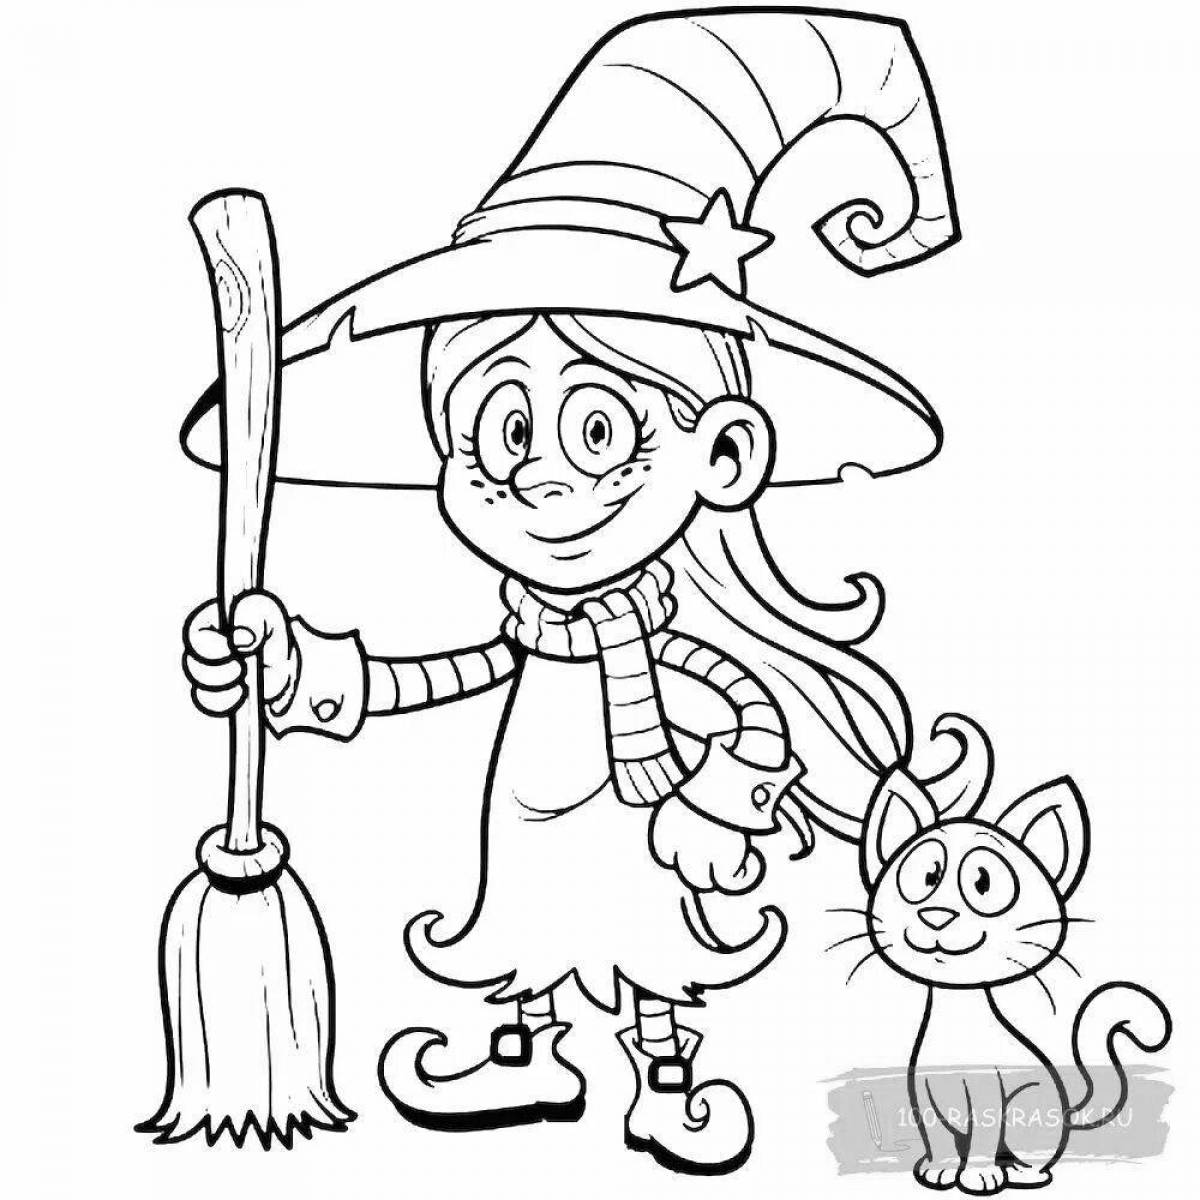 Witchy coloring page for real witches